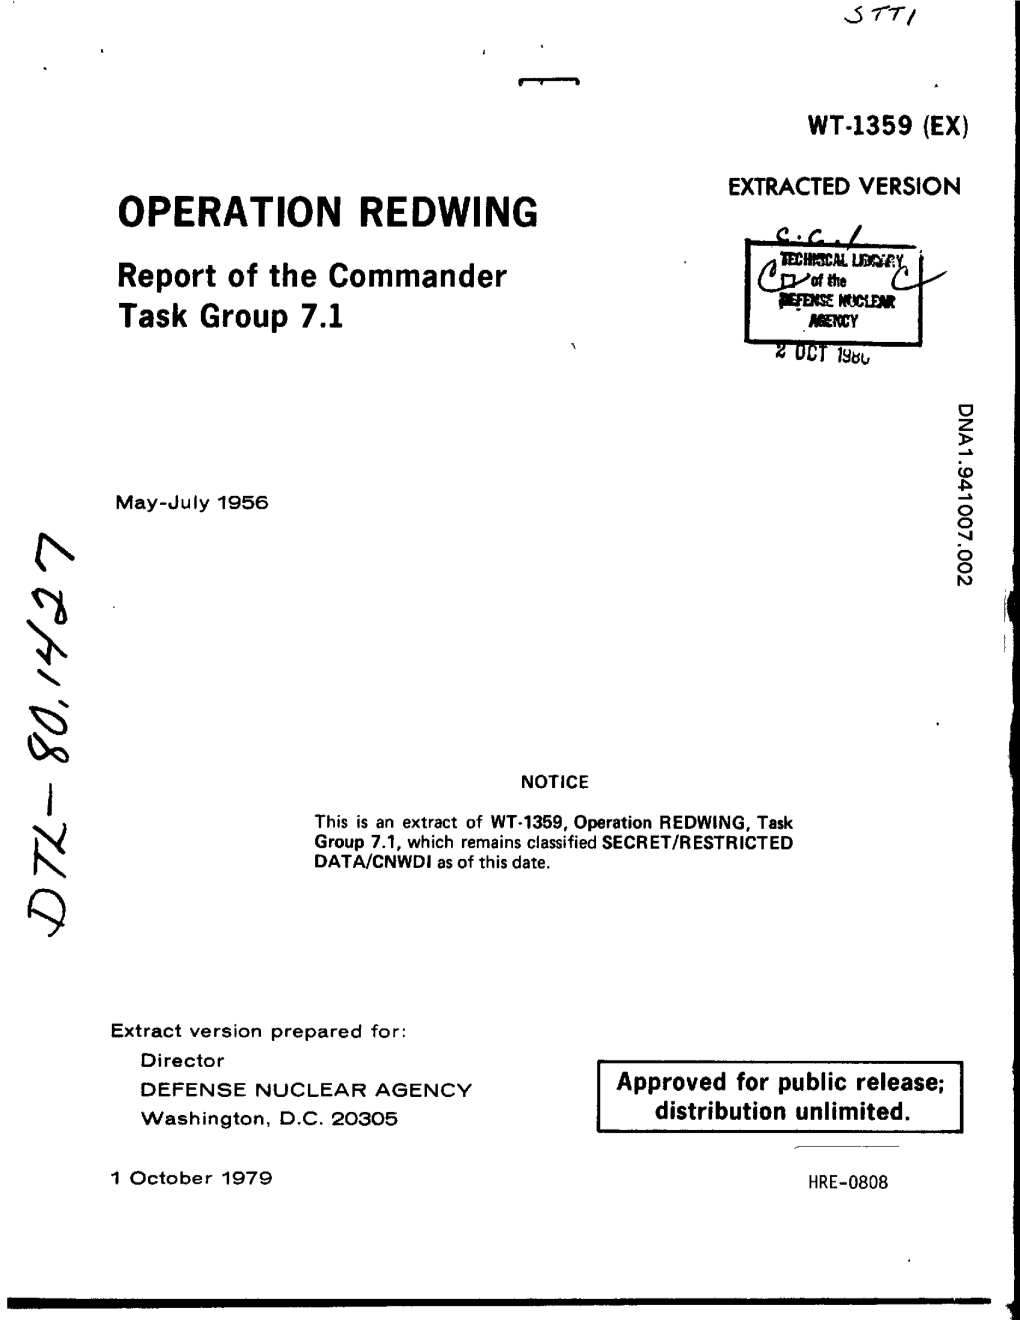 OPERATION REDWING Report of the Commander Task Group 7.1